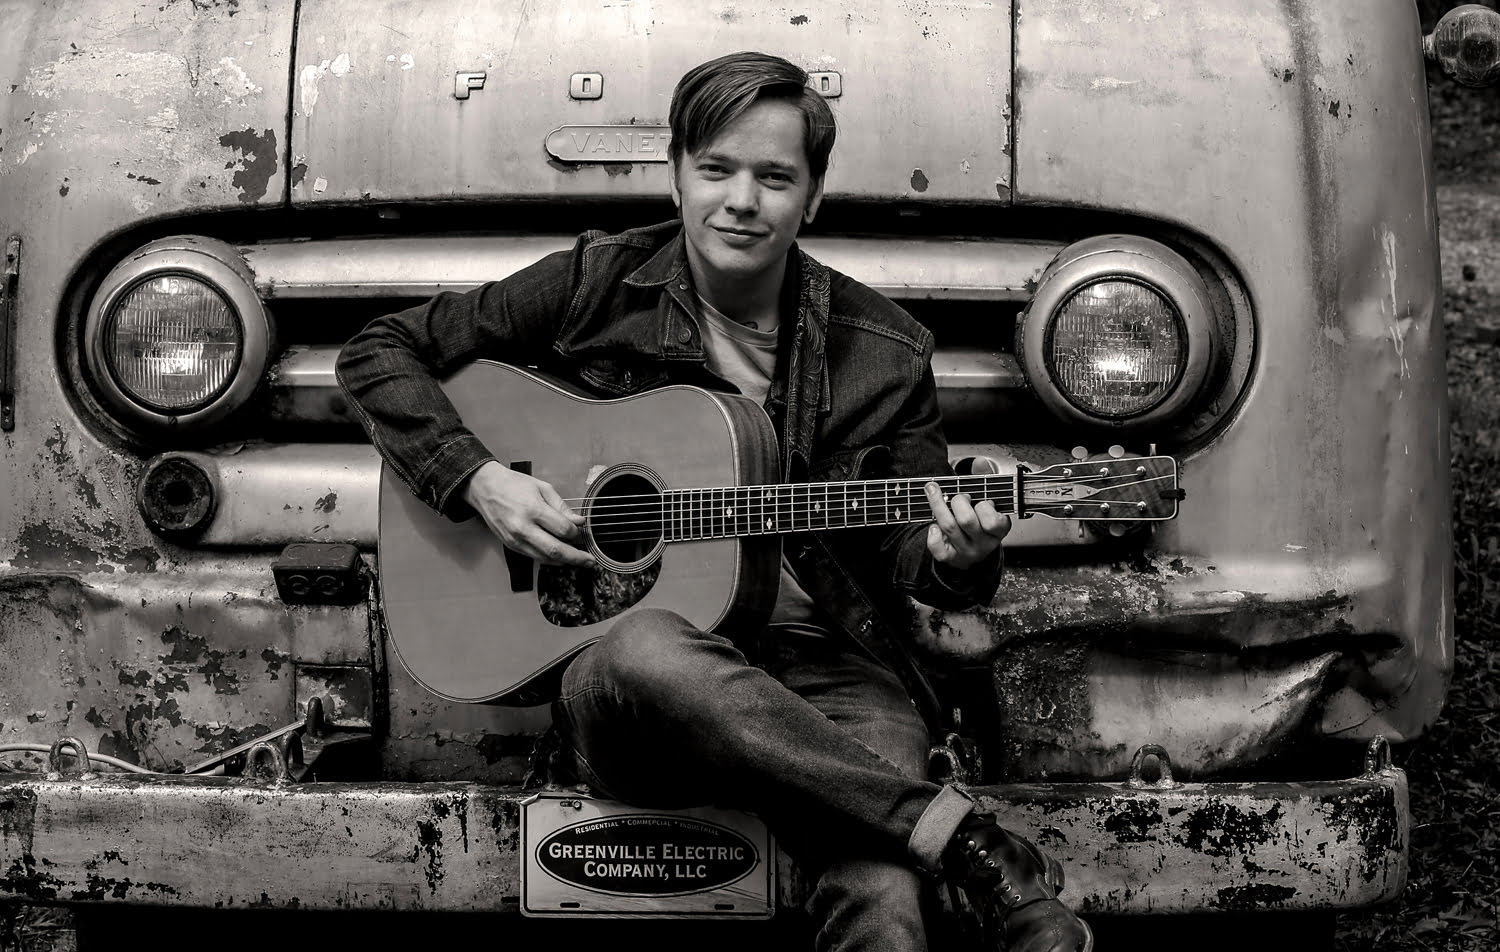 Everyone's Doing It: Bryan Sutton in Conversation with Billy Strings